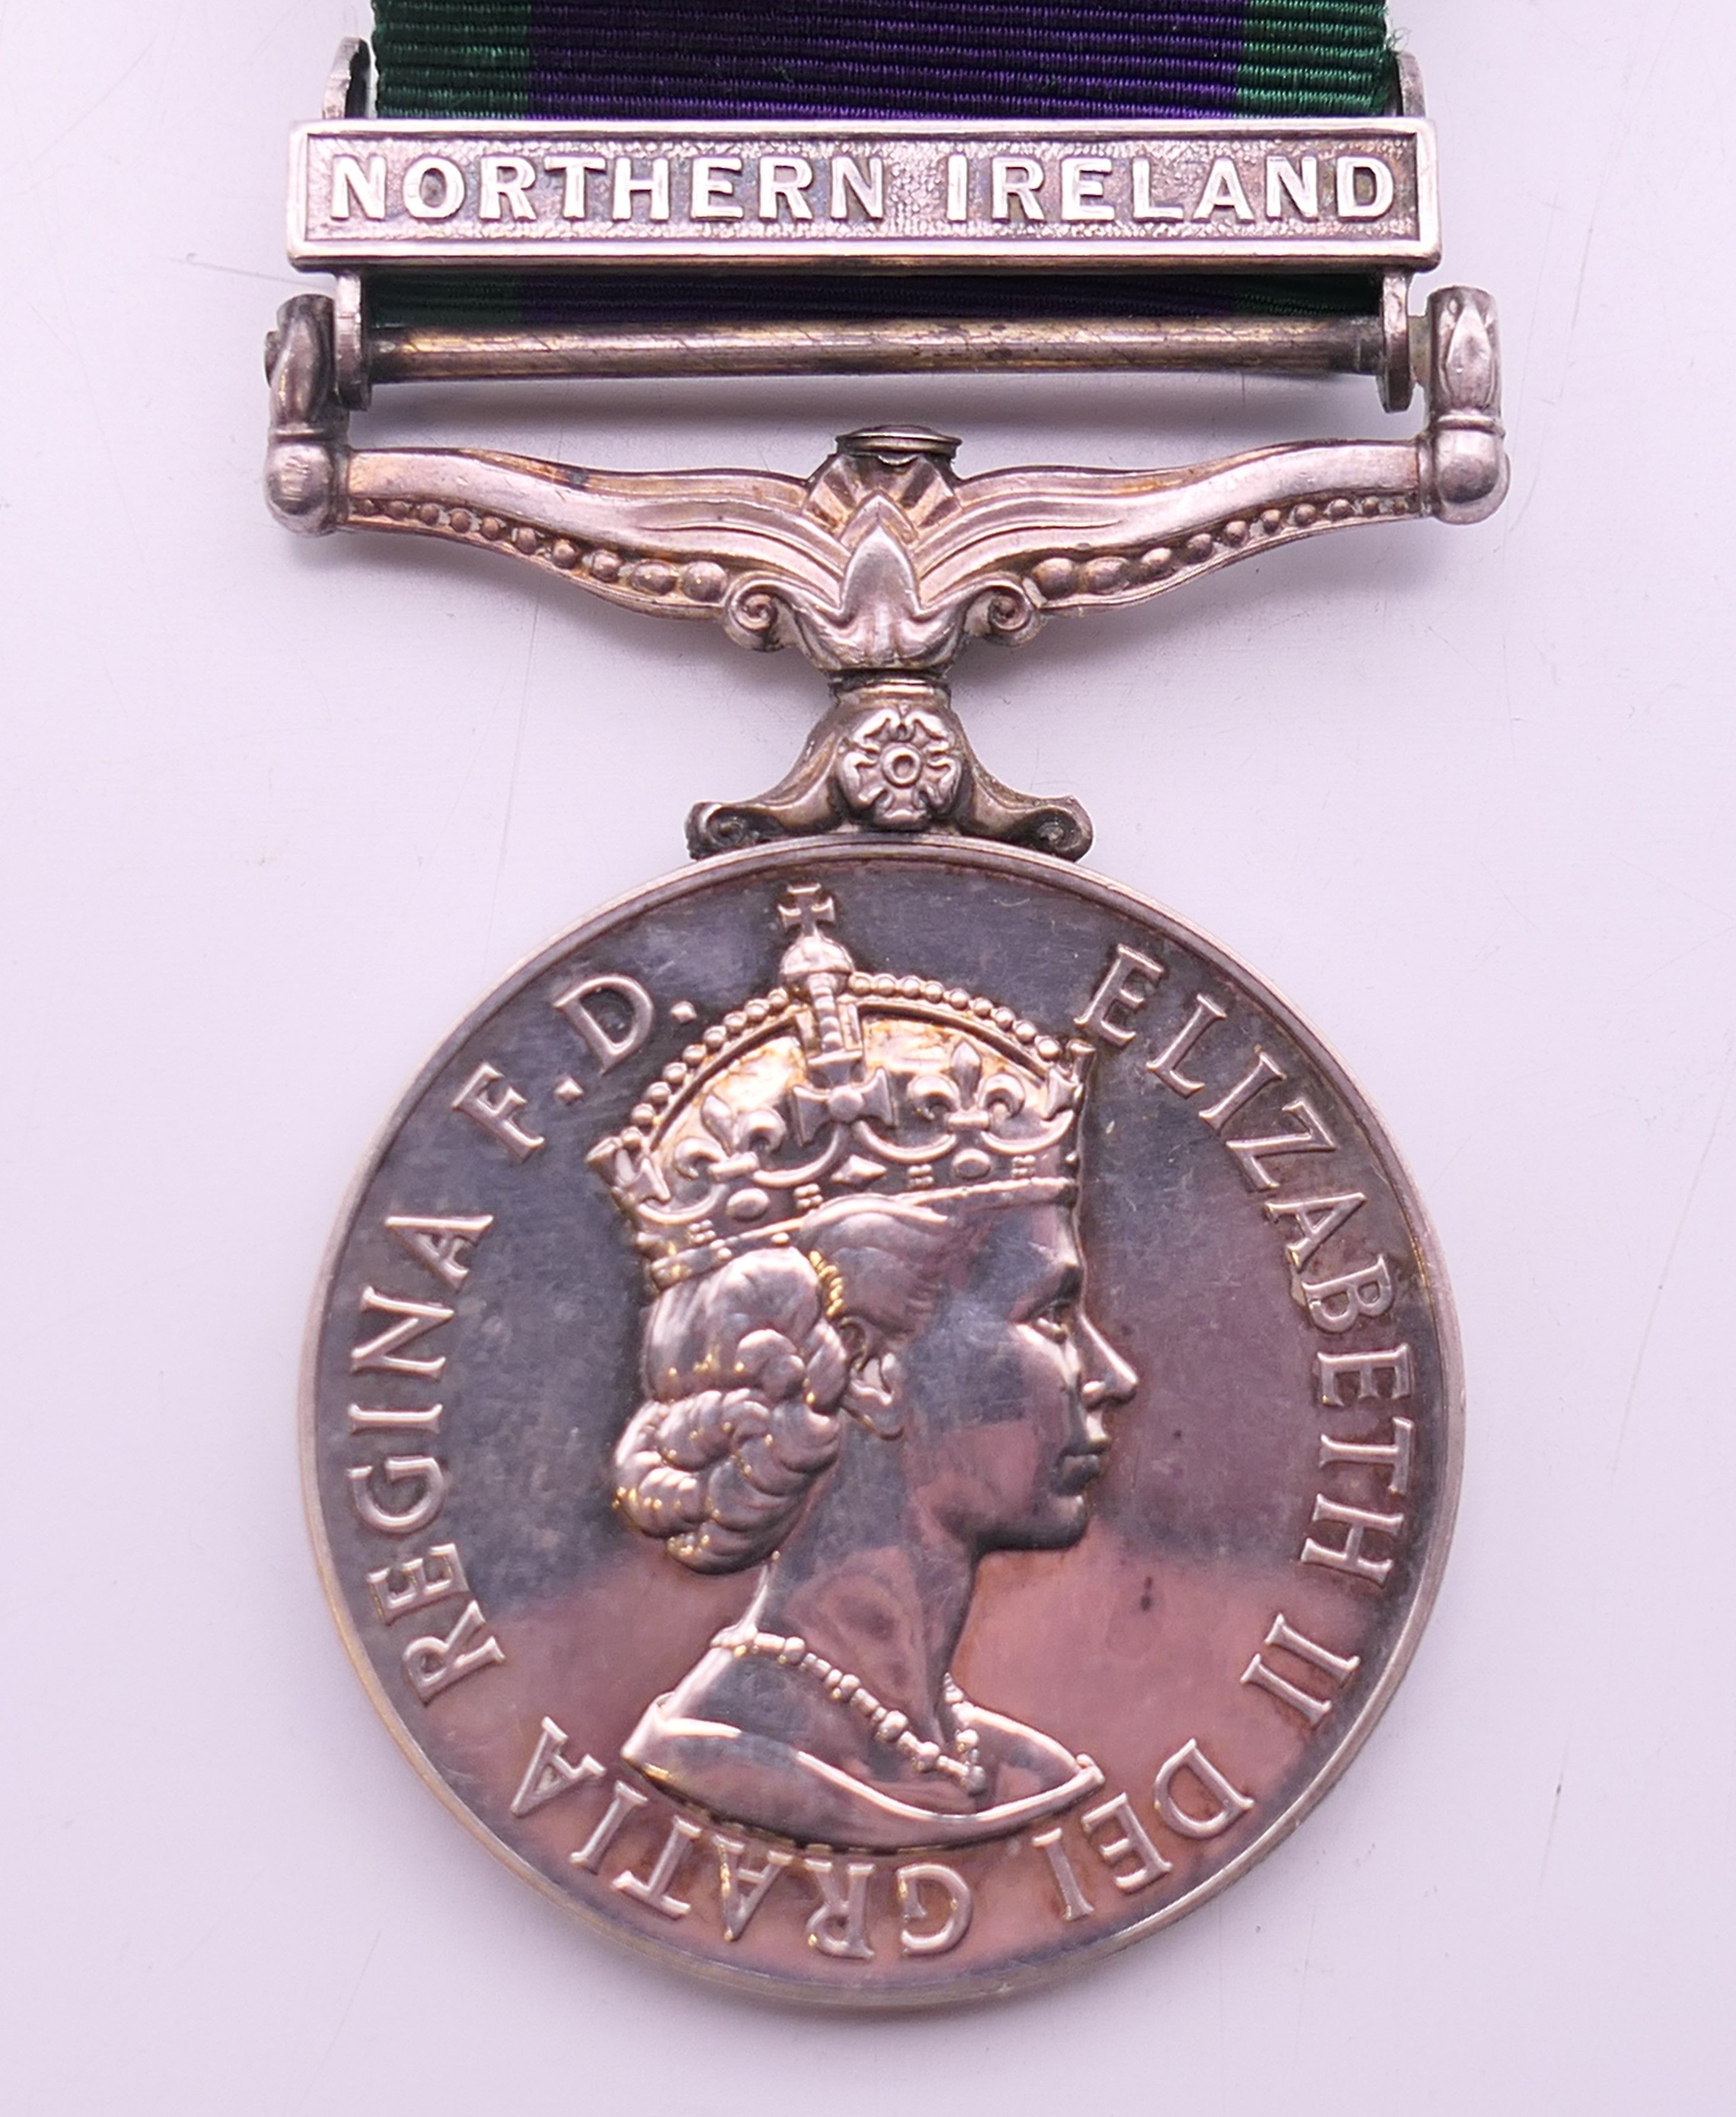 A Queen Elizabeth II Campaign medal with Northern Ireland bar and miniature, - Image 3 of 8